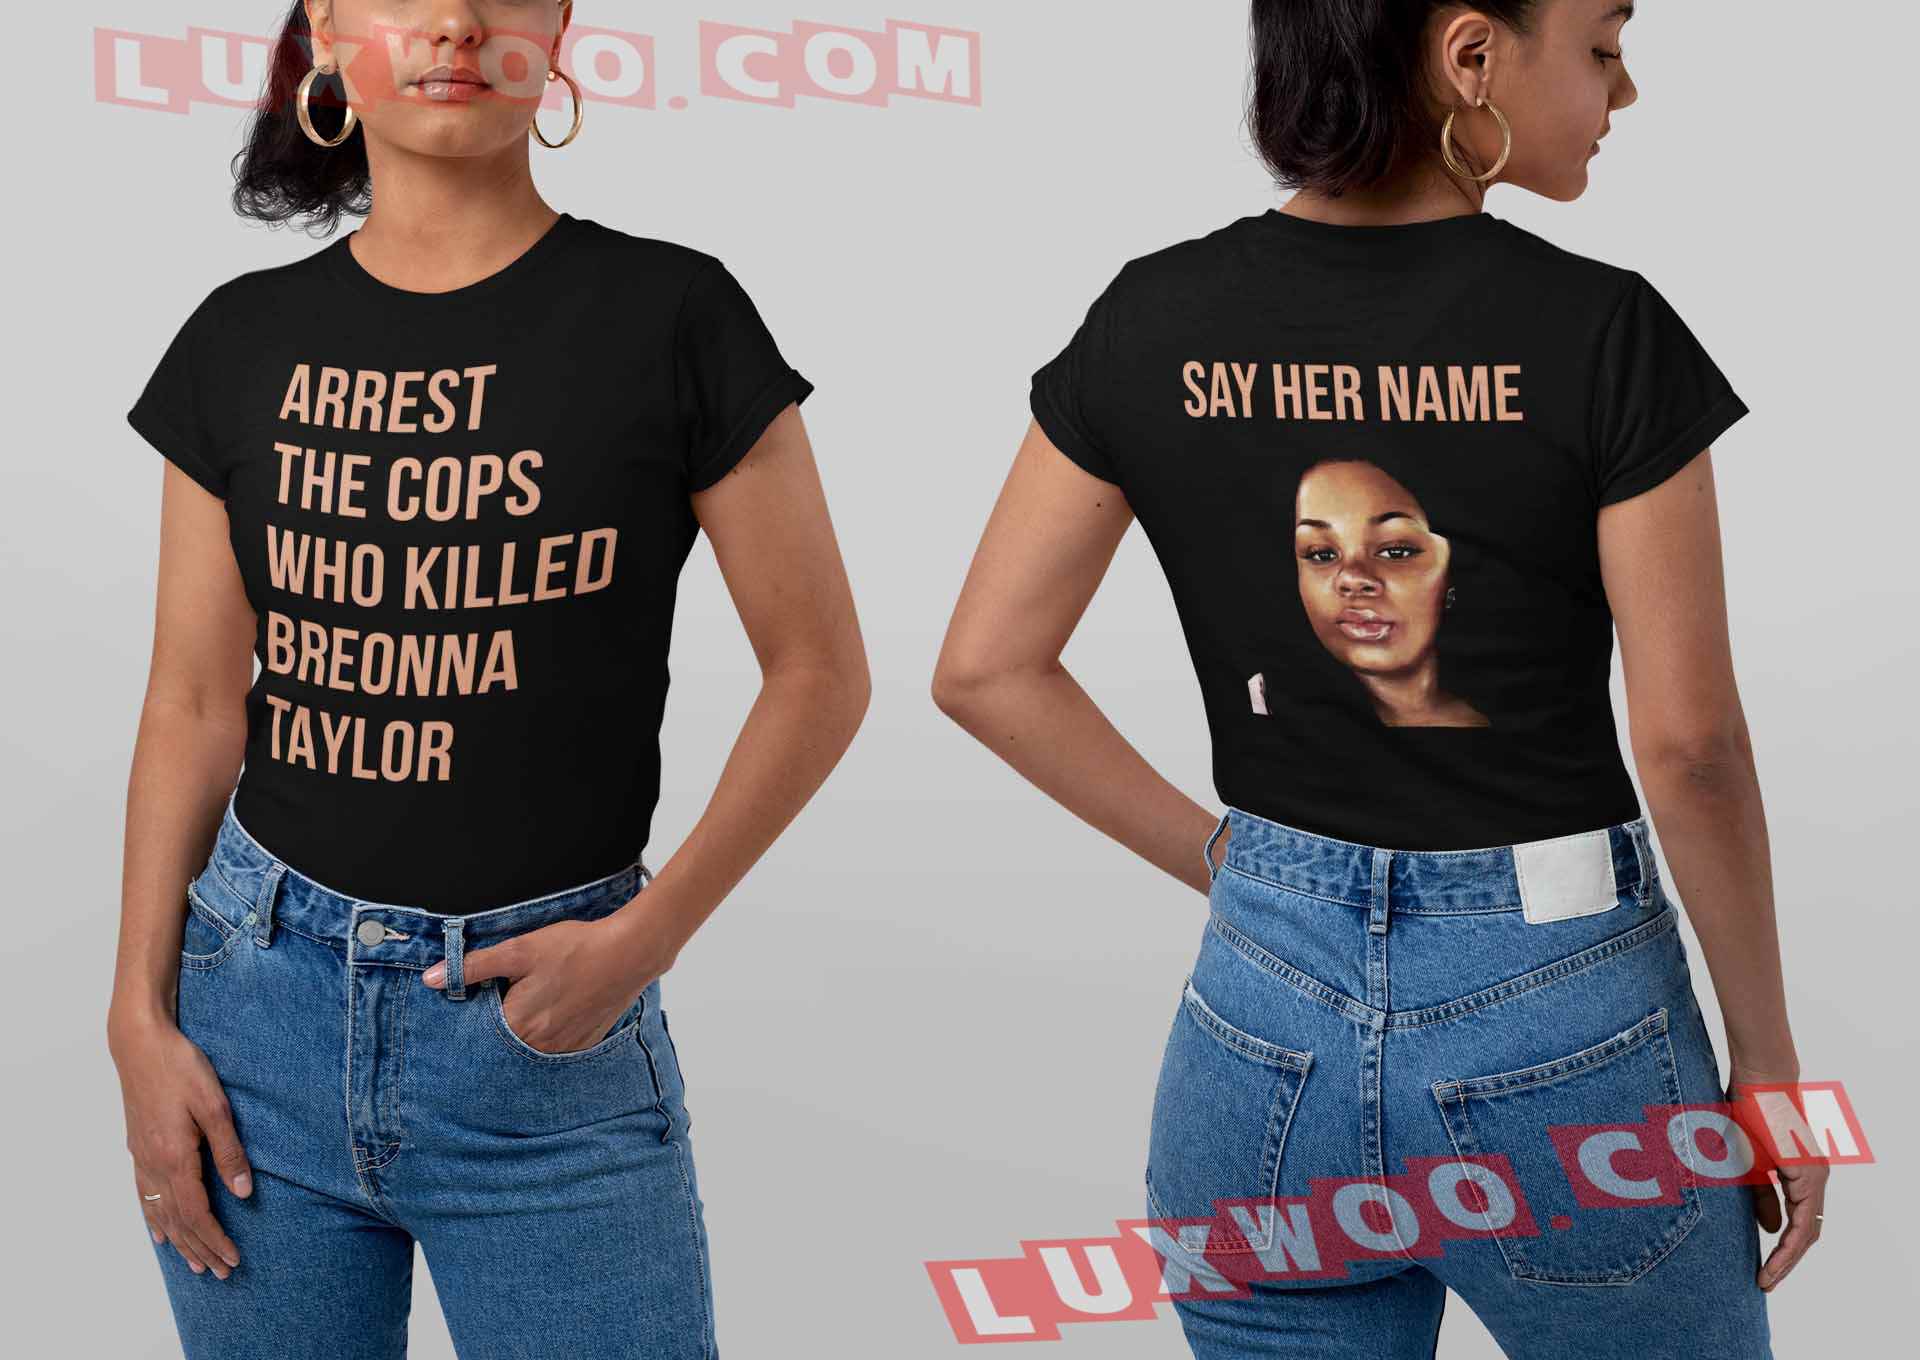 Arrest The Cops Who Killed Breonna Taylor Shirt